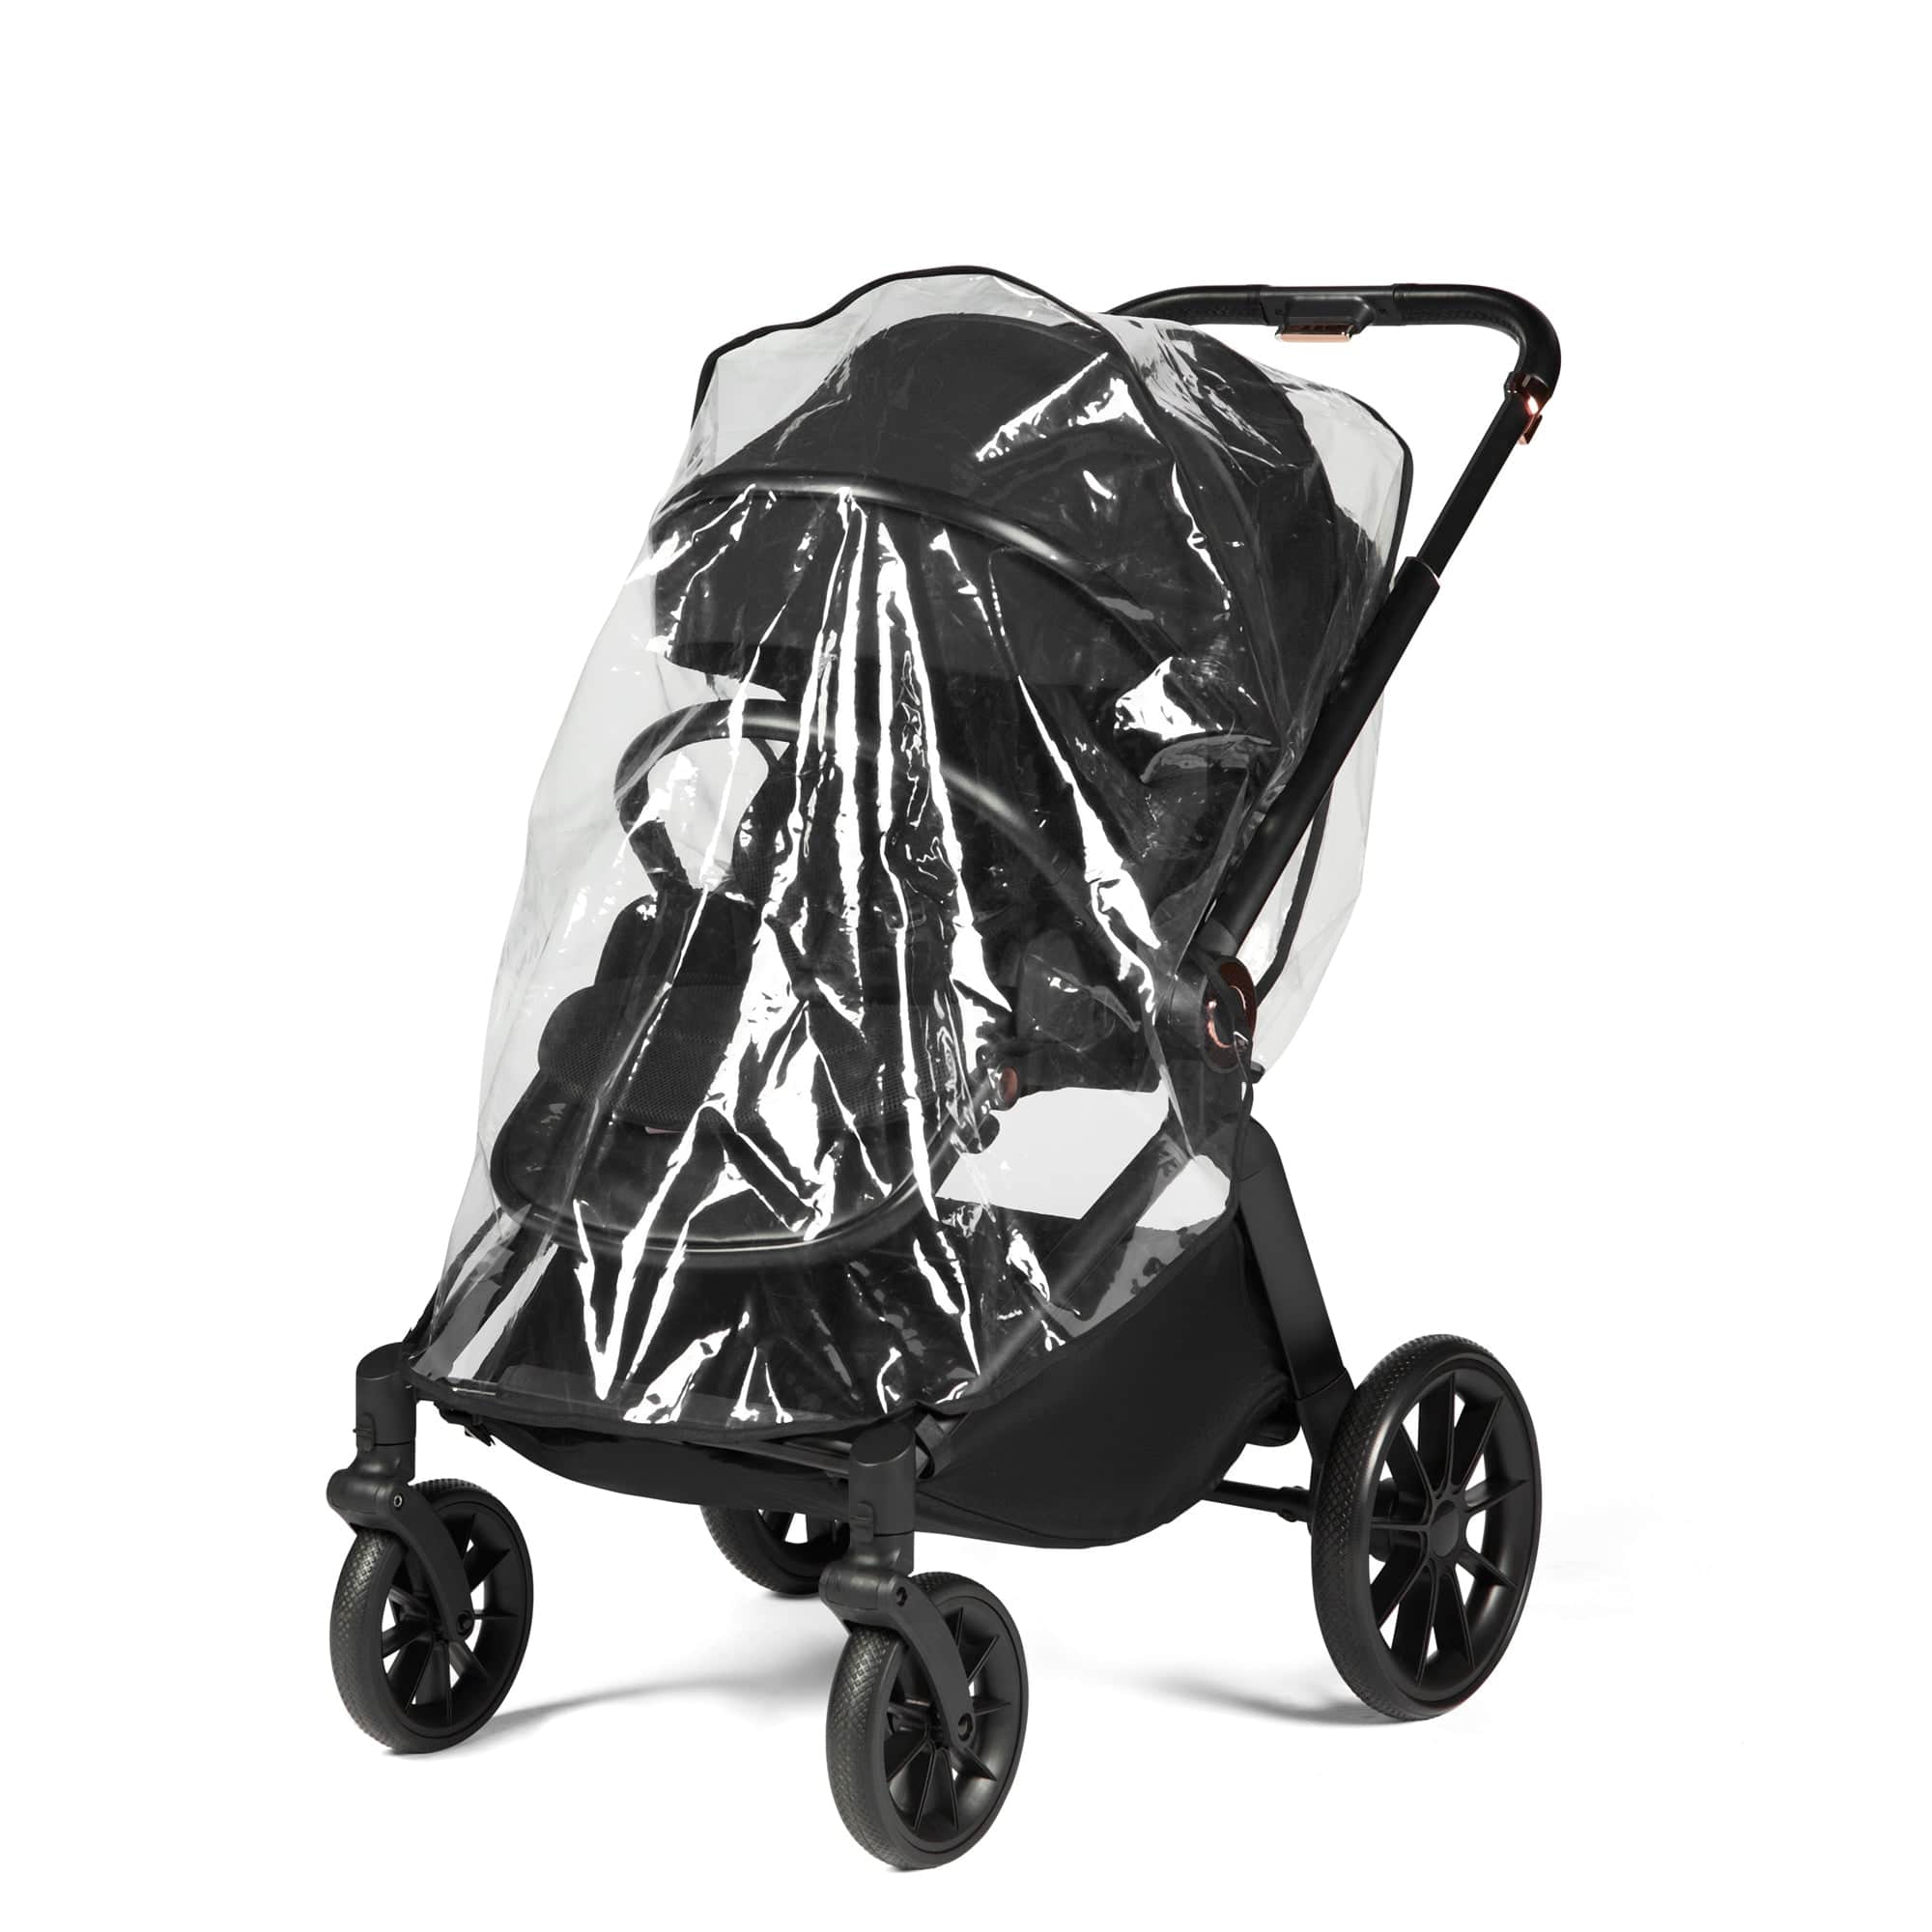 Ickle Bubba Pushchairs & Buggies ALTIMA 2 IN 1 - BLACK 10-012-000-001